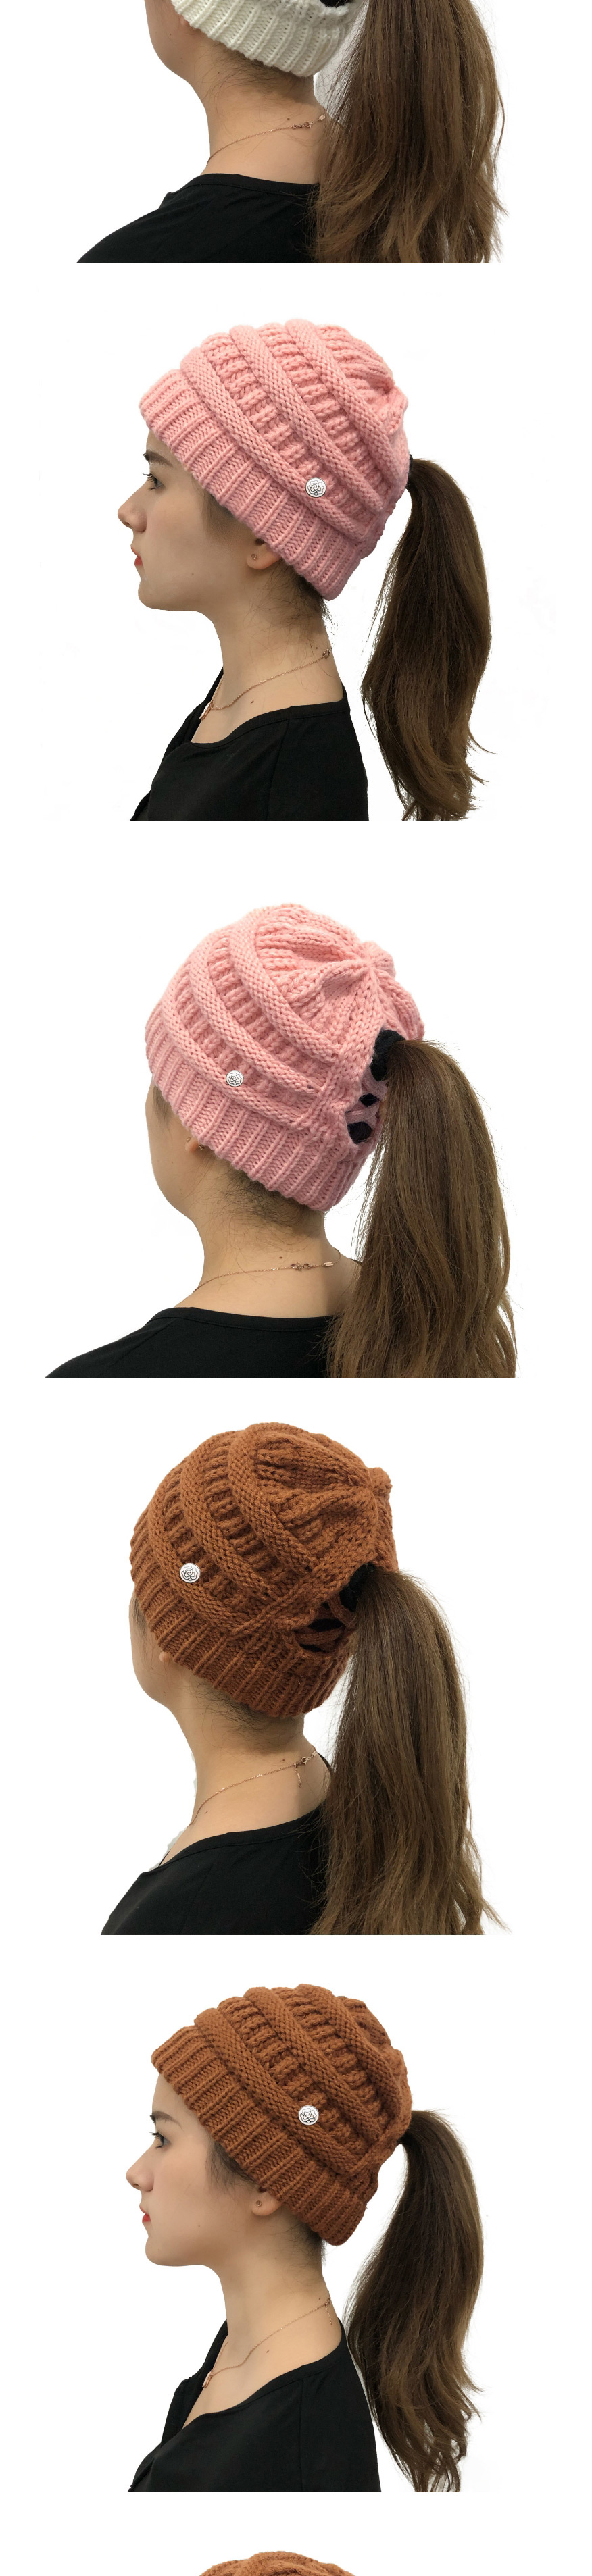 Fashion Caramel Button Detachable Cross-back Ponytail Knitted Hat,Knitting Wool Hats